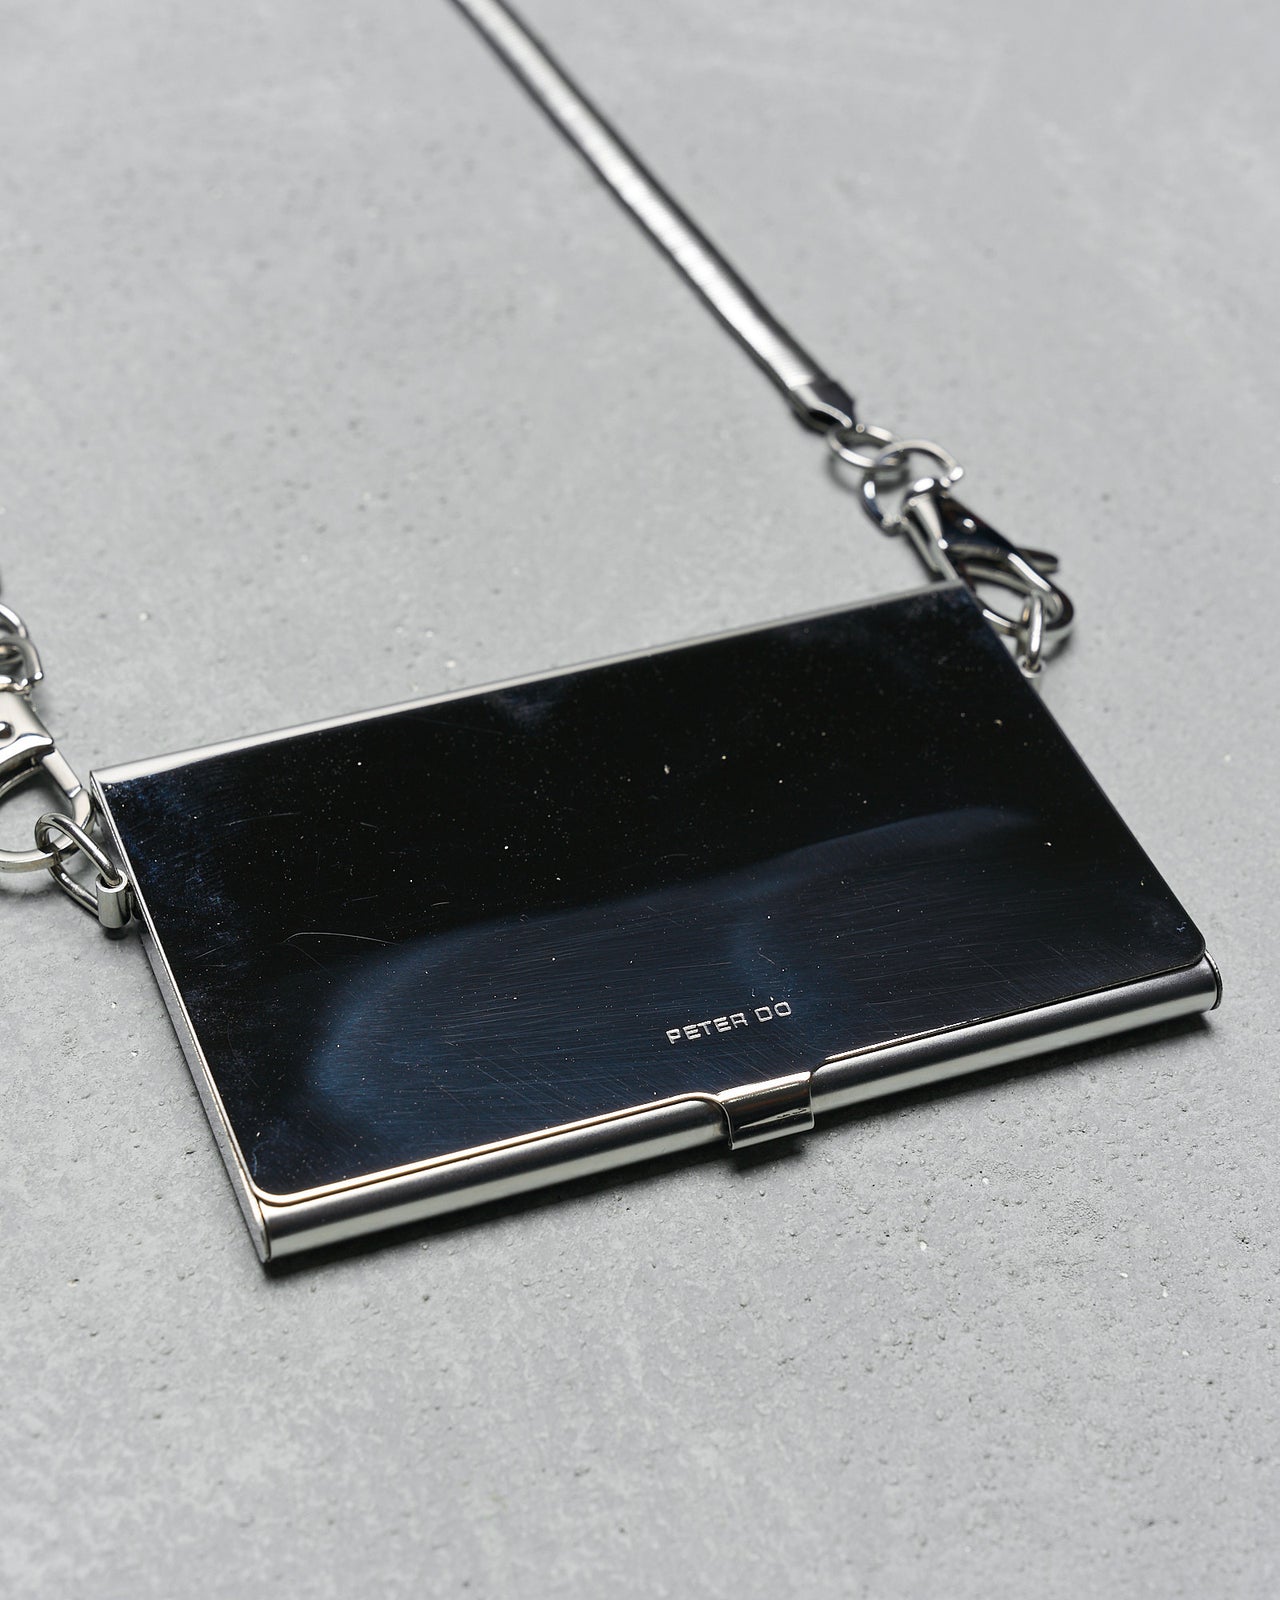 Peter Do SS 2020 Card case with snake chain strap